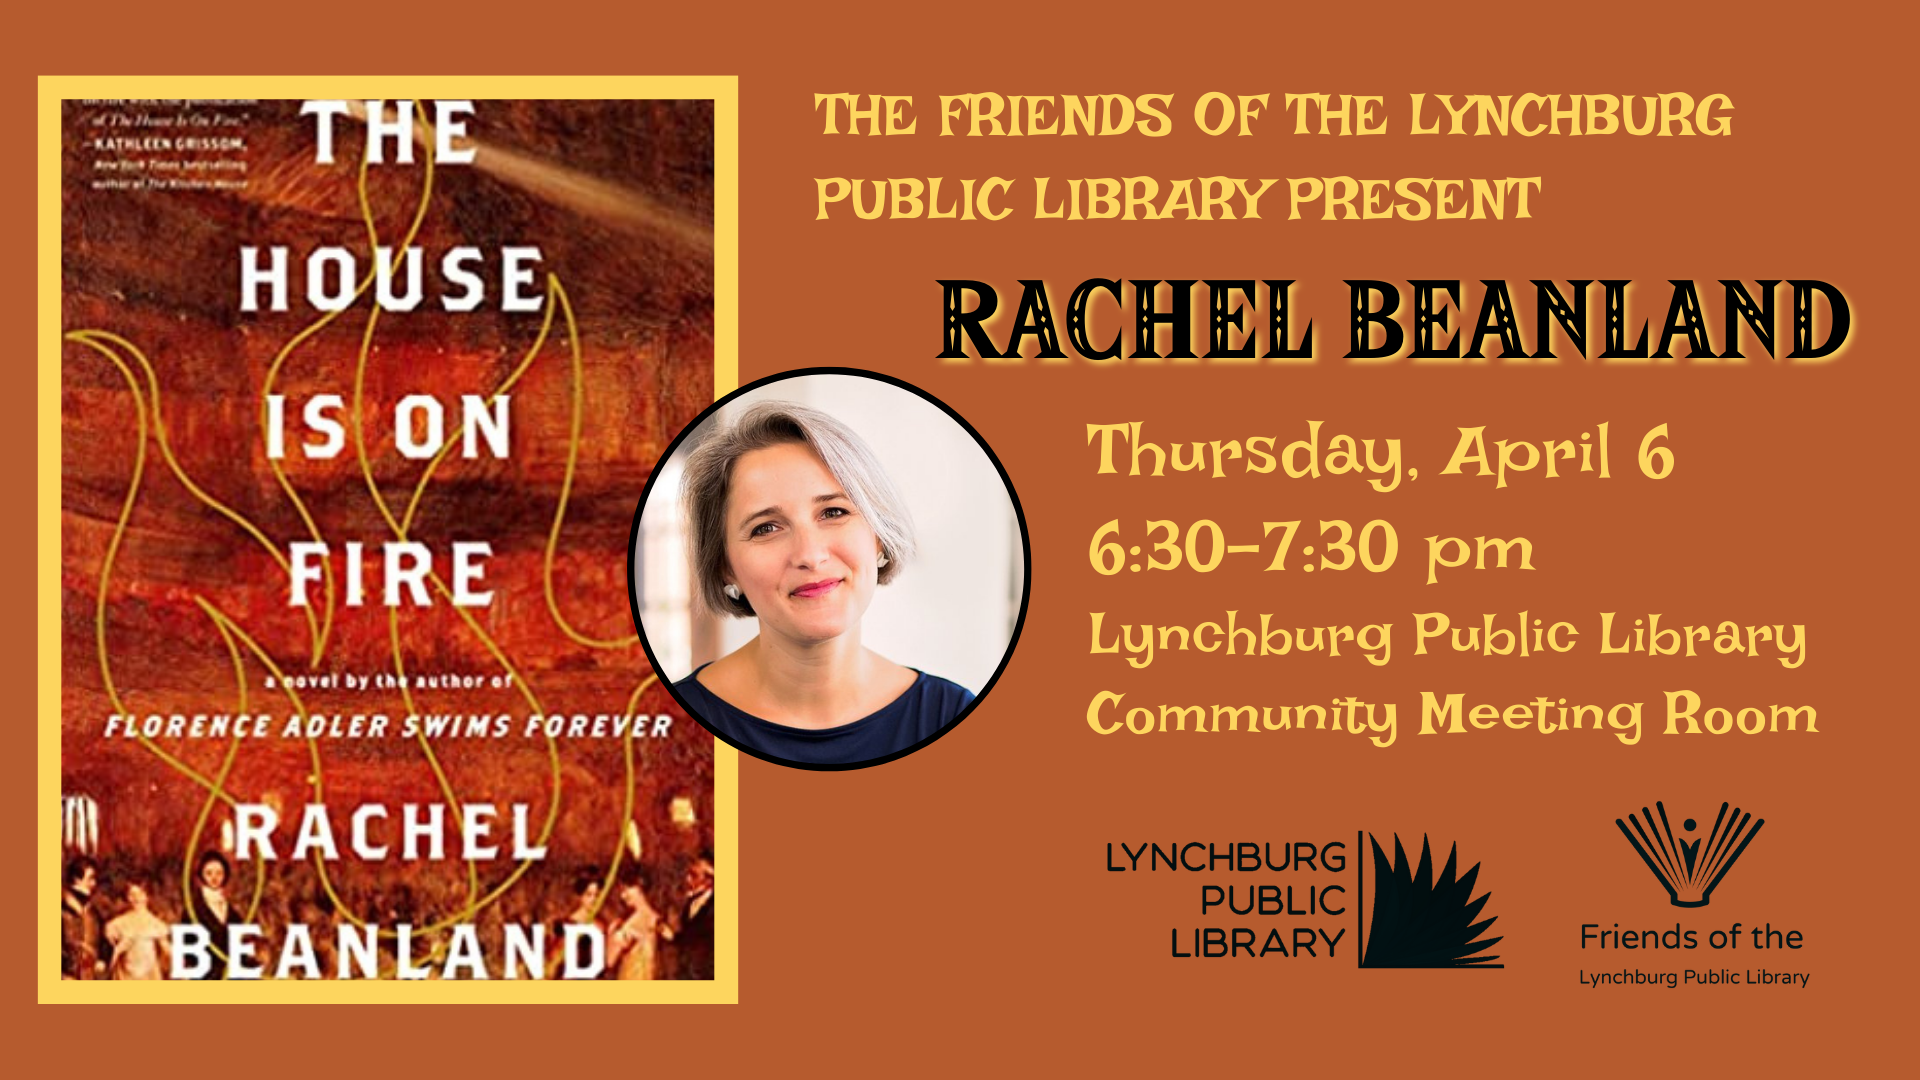 Rachel Beanland Author Event at the Main Library, April 6 from 6:30-7:30 pm